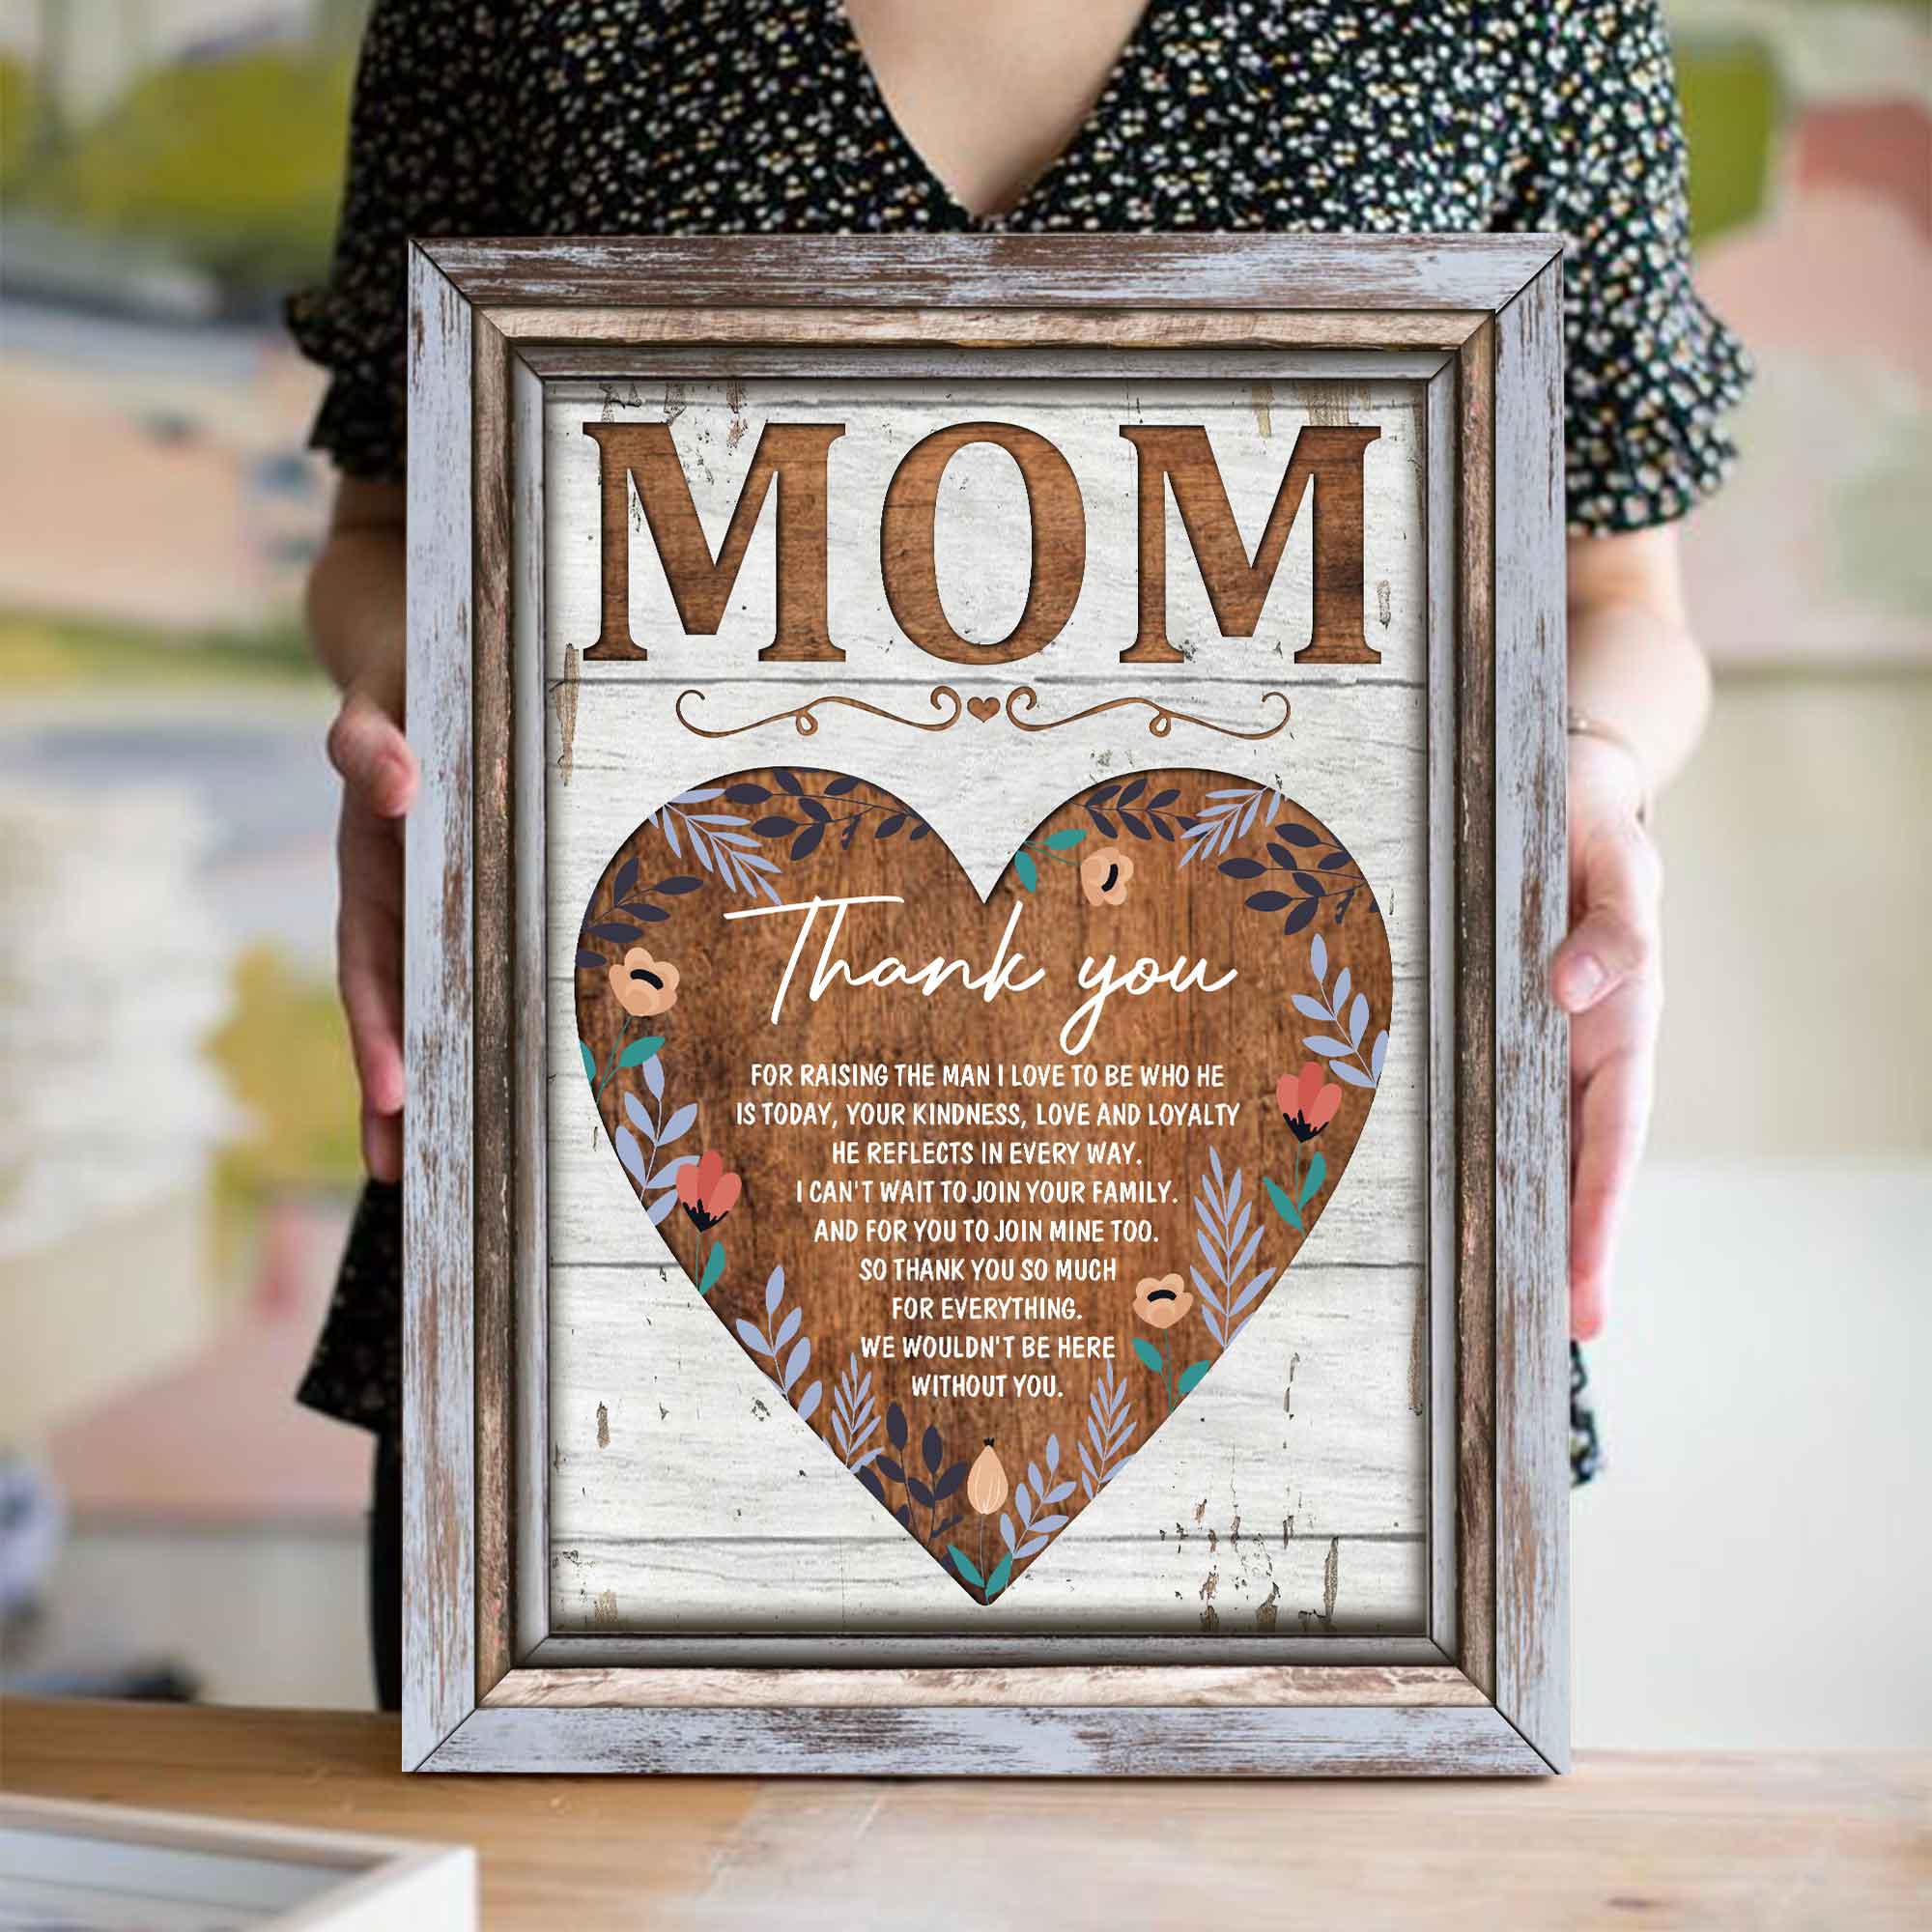 Mother Day Gift MOM Unique Gift Ideas for Mom Mother of the Bride